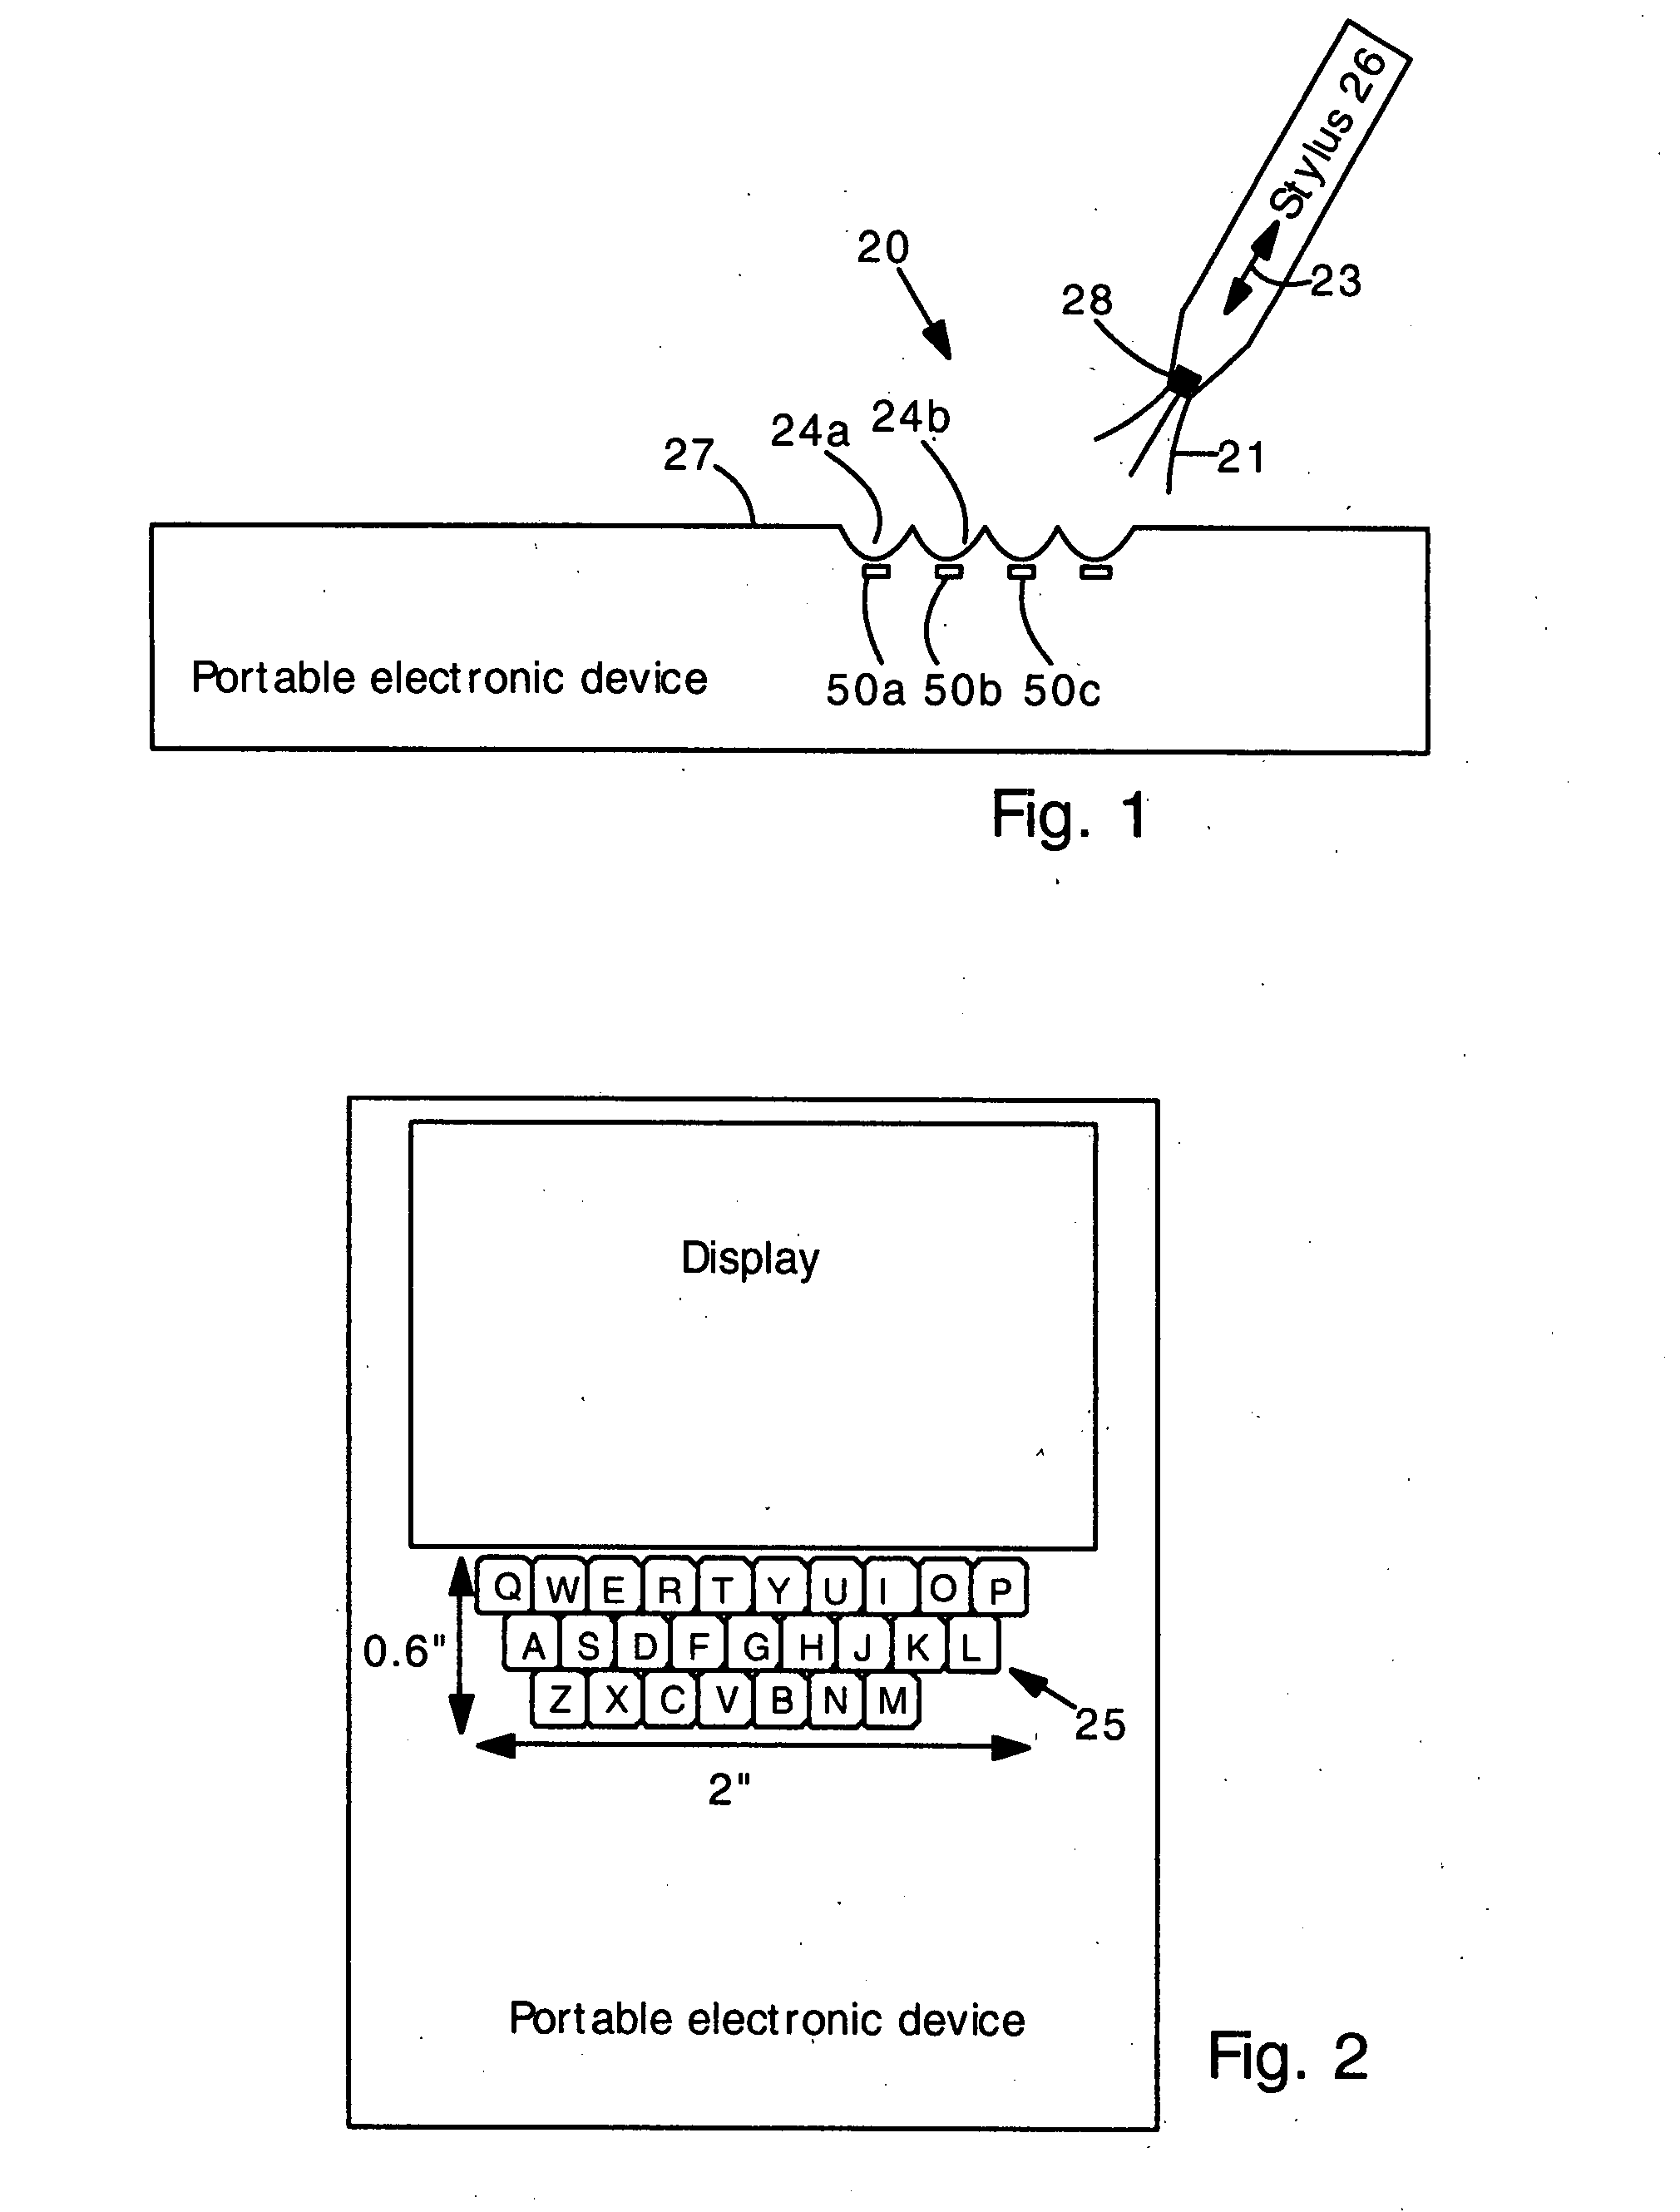 Keyboard having magnet-actuted switches